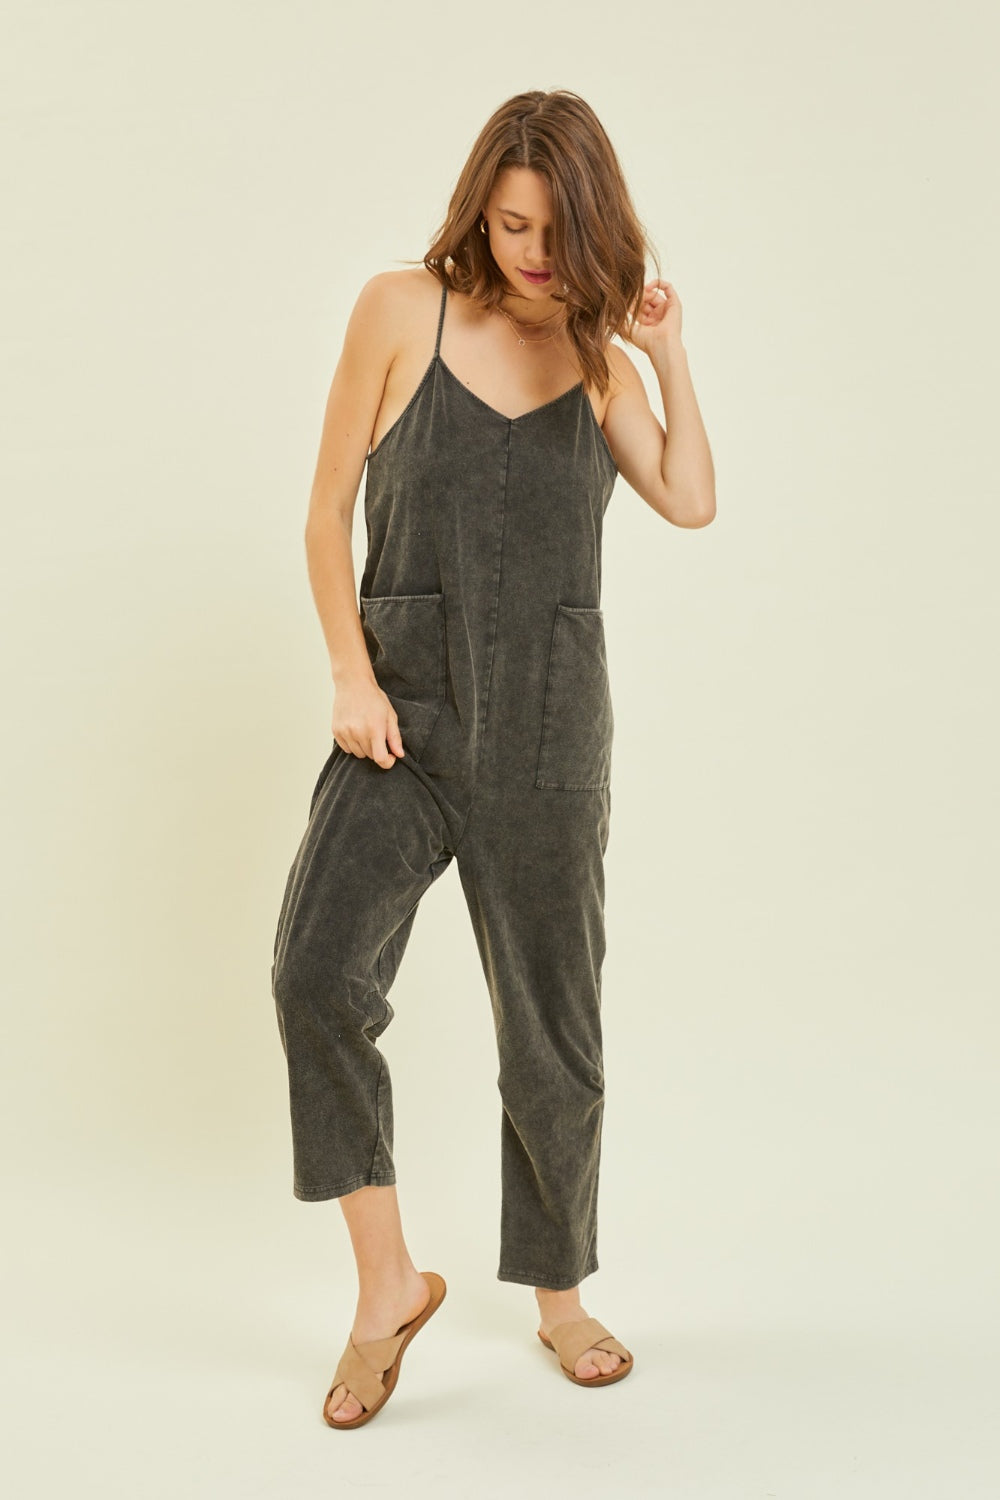 Women's Full Size Mineral-Washed Oversized Jumpsuit with Pockets | Jumpsuits | Ro + Ivy